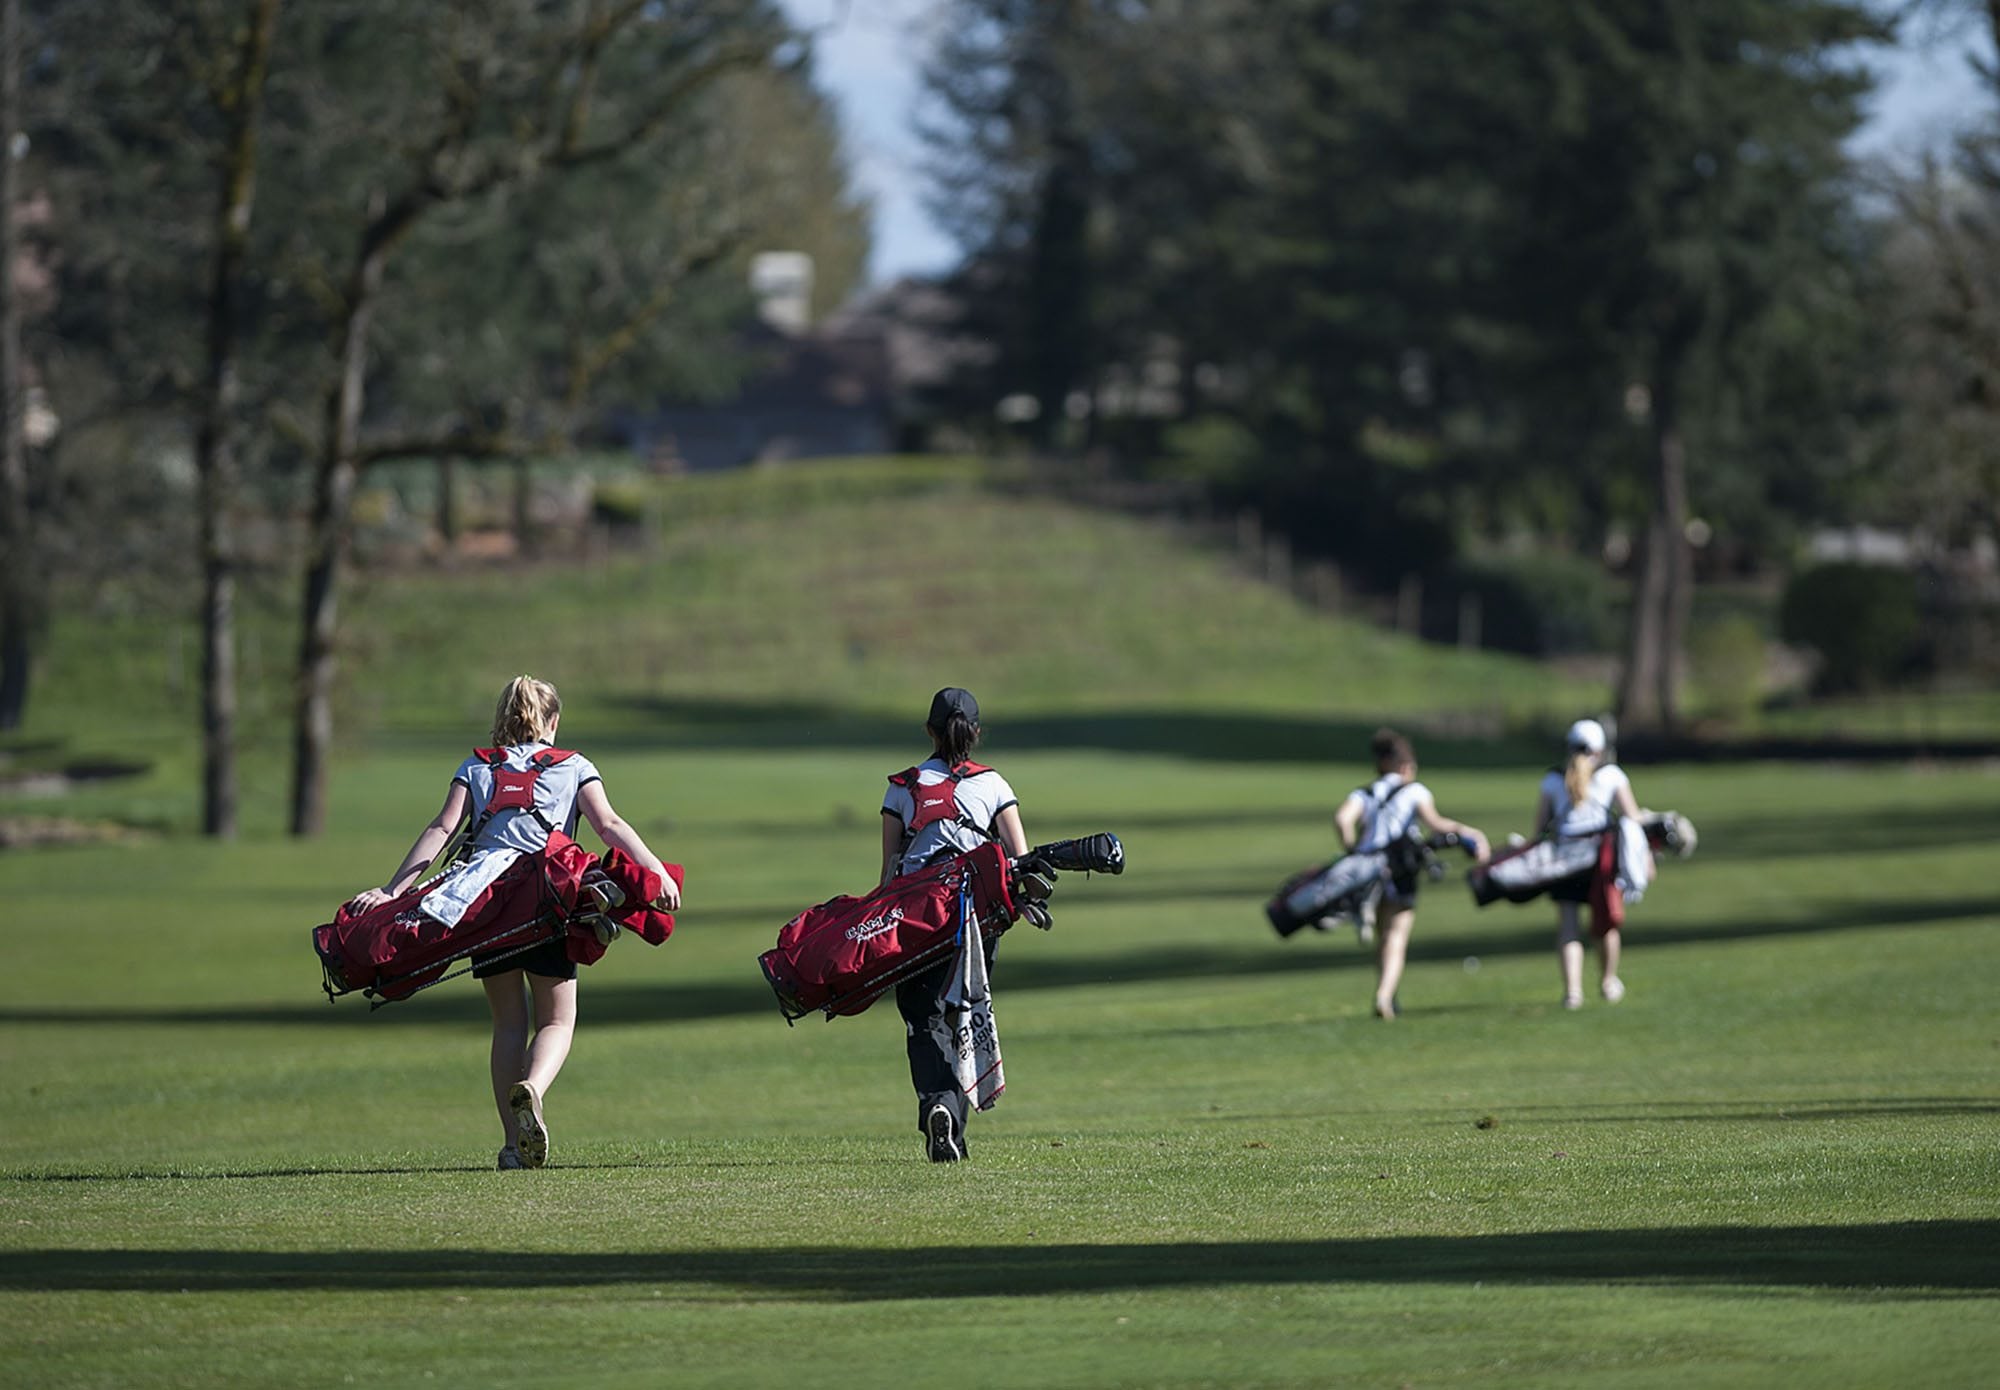 Camas' Elise Filuk and Connie Wang, from left, join Union's Reilly Whitlock and Taylor Hartley on the course Tuesday afternoon, March 29, 2016 at Camas Meadows Golf Course.